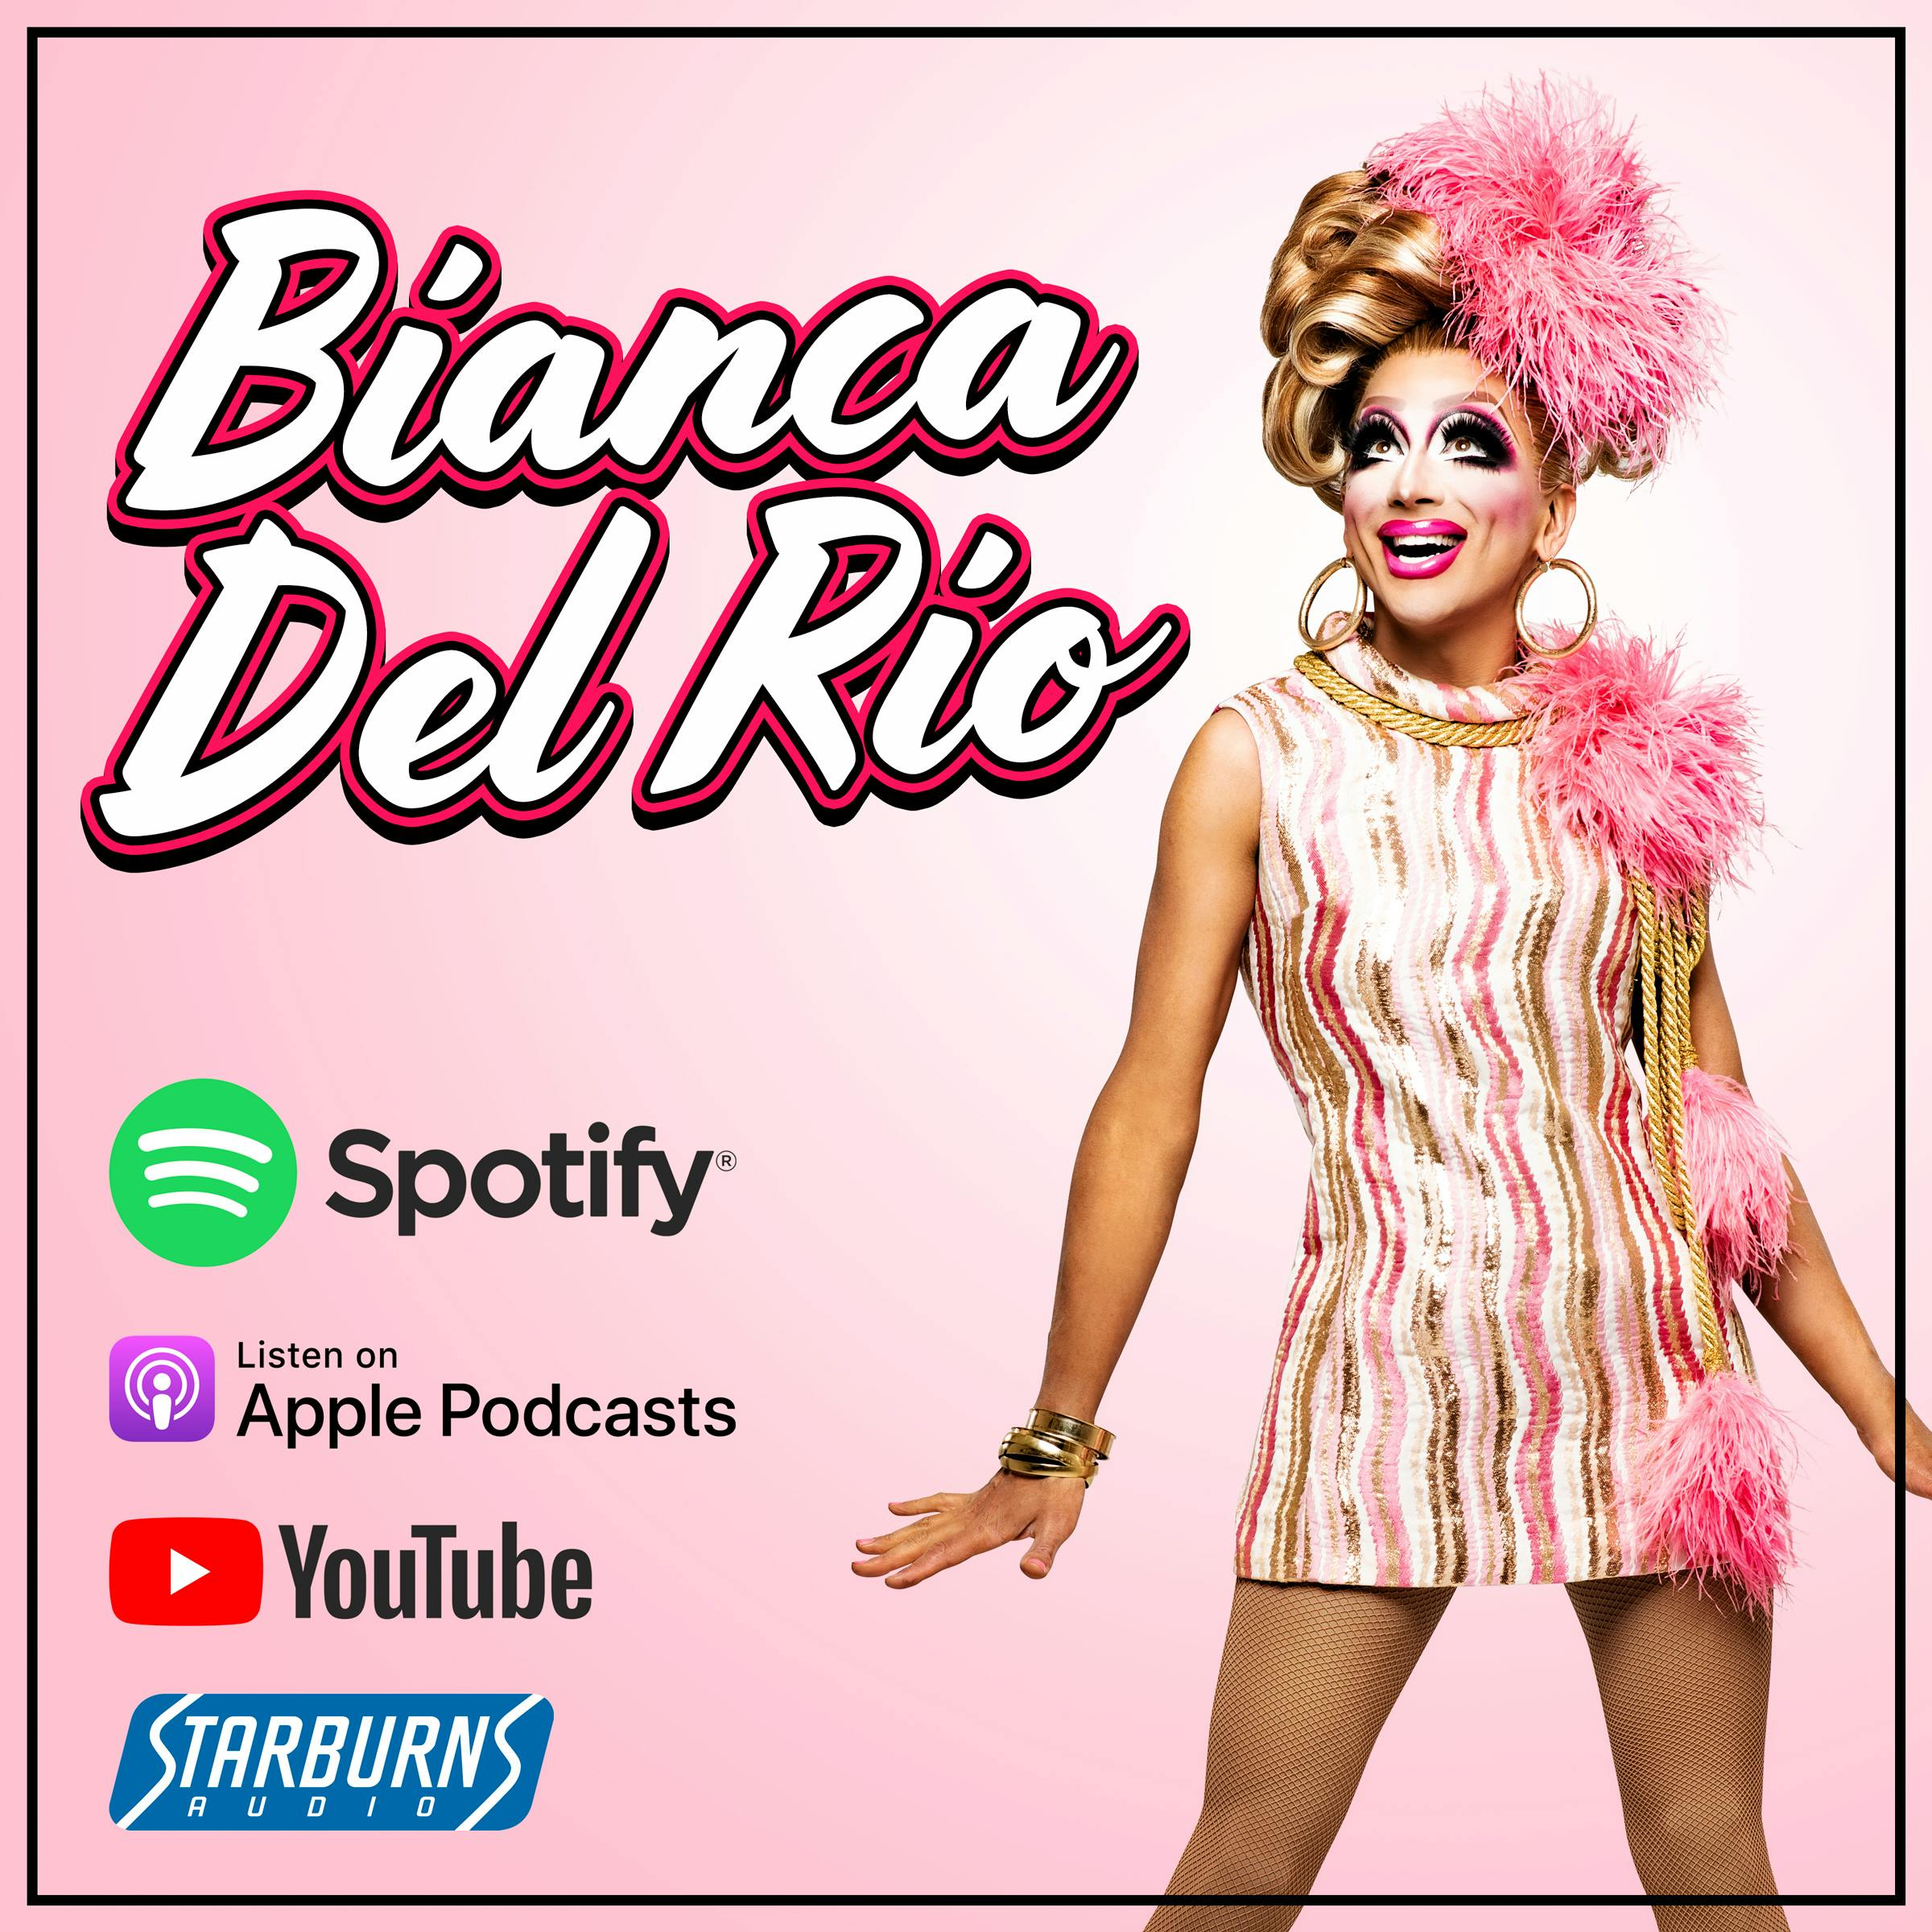 Introducing the new podcast Bianca Del Rio